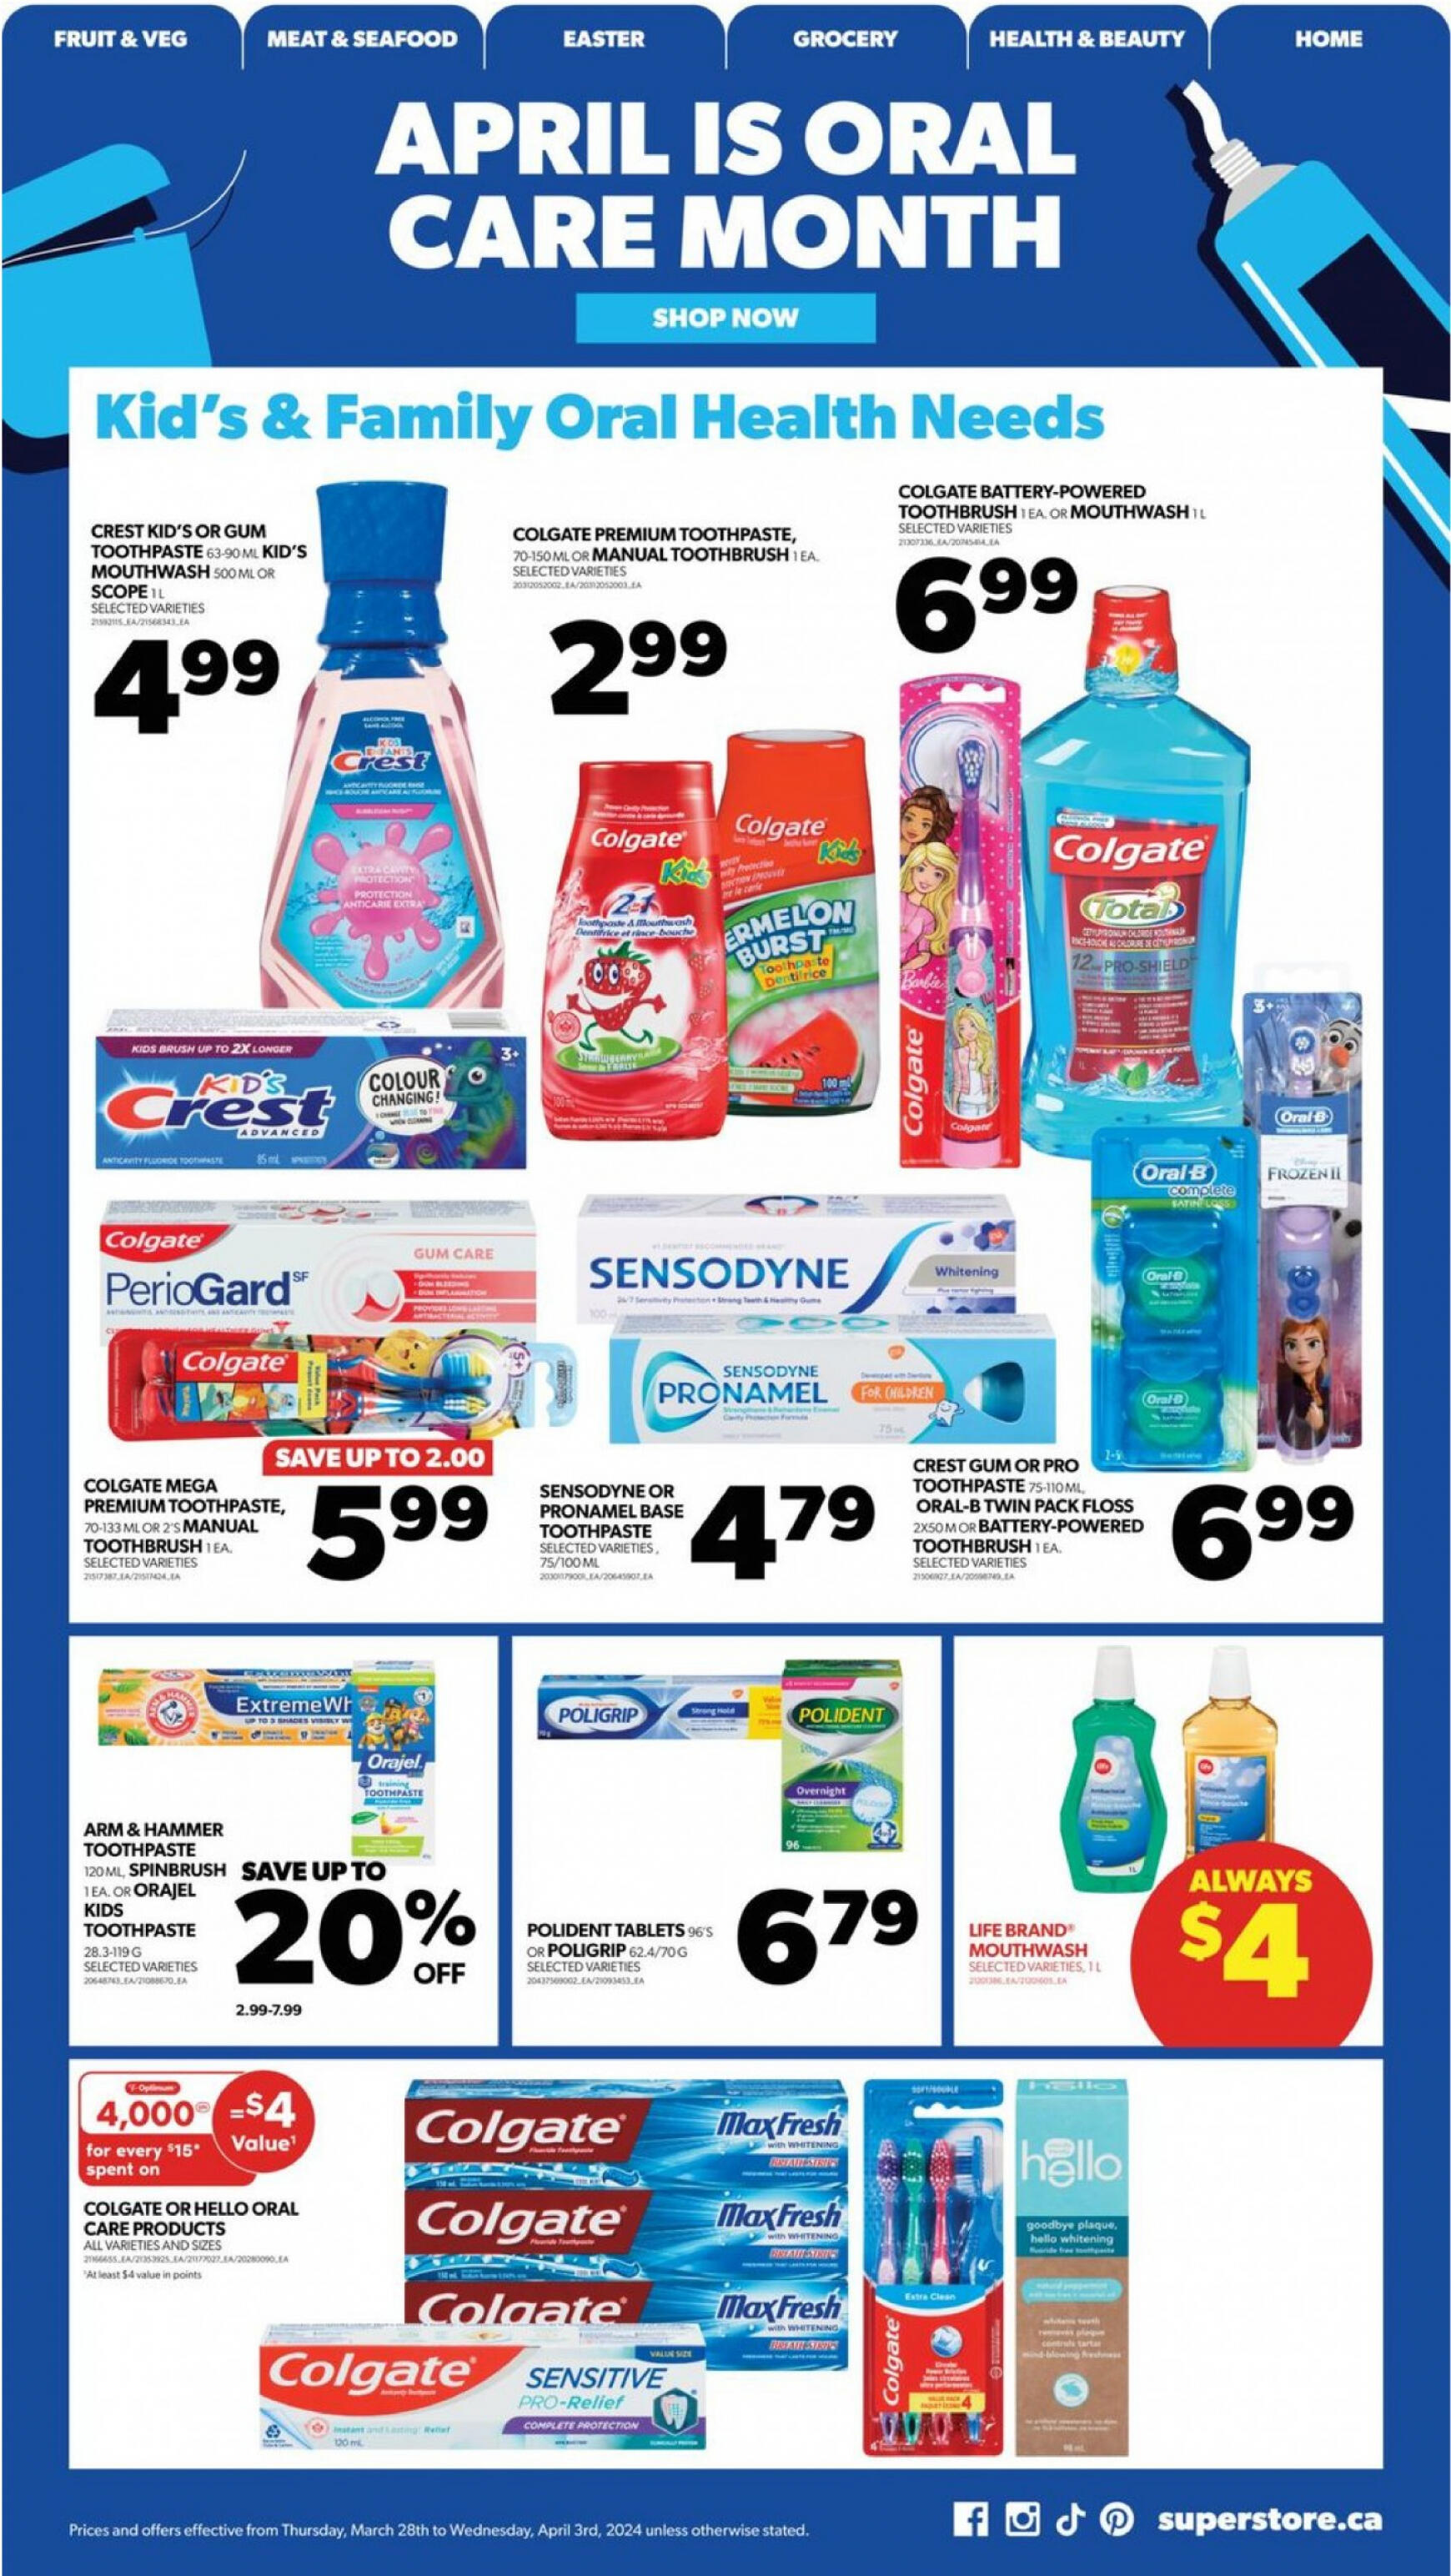 real-canadian-superstore - Real Canadian Superstore flyer current 28.03. - 03.04. - page: 28